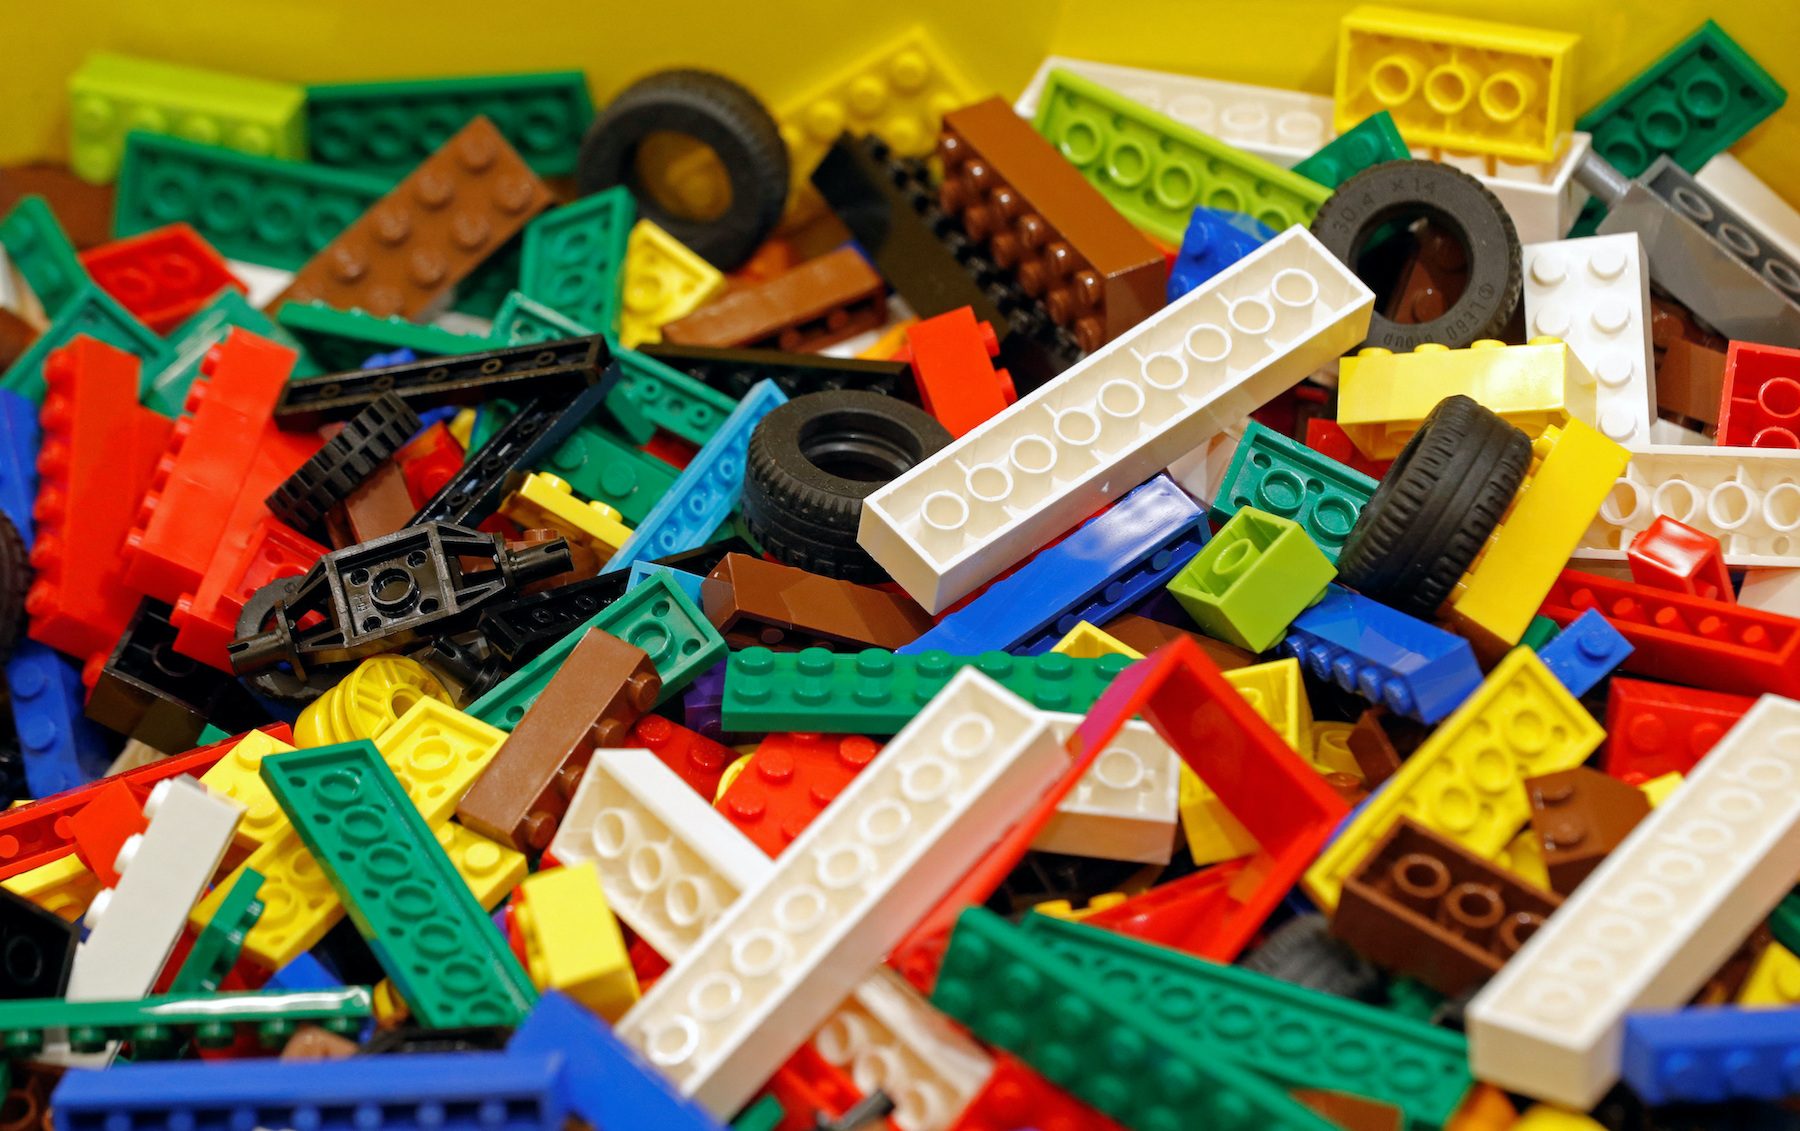 Lego posts strong growth on robust demand, new store openings